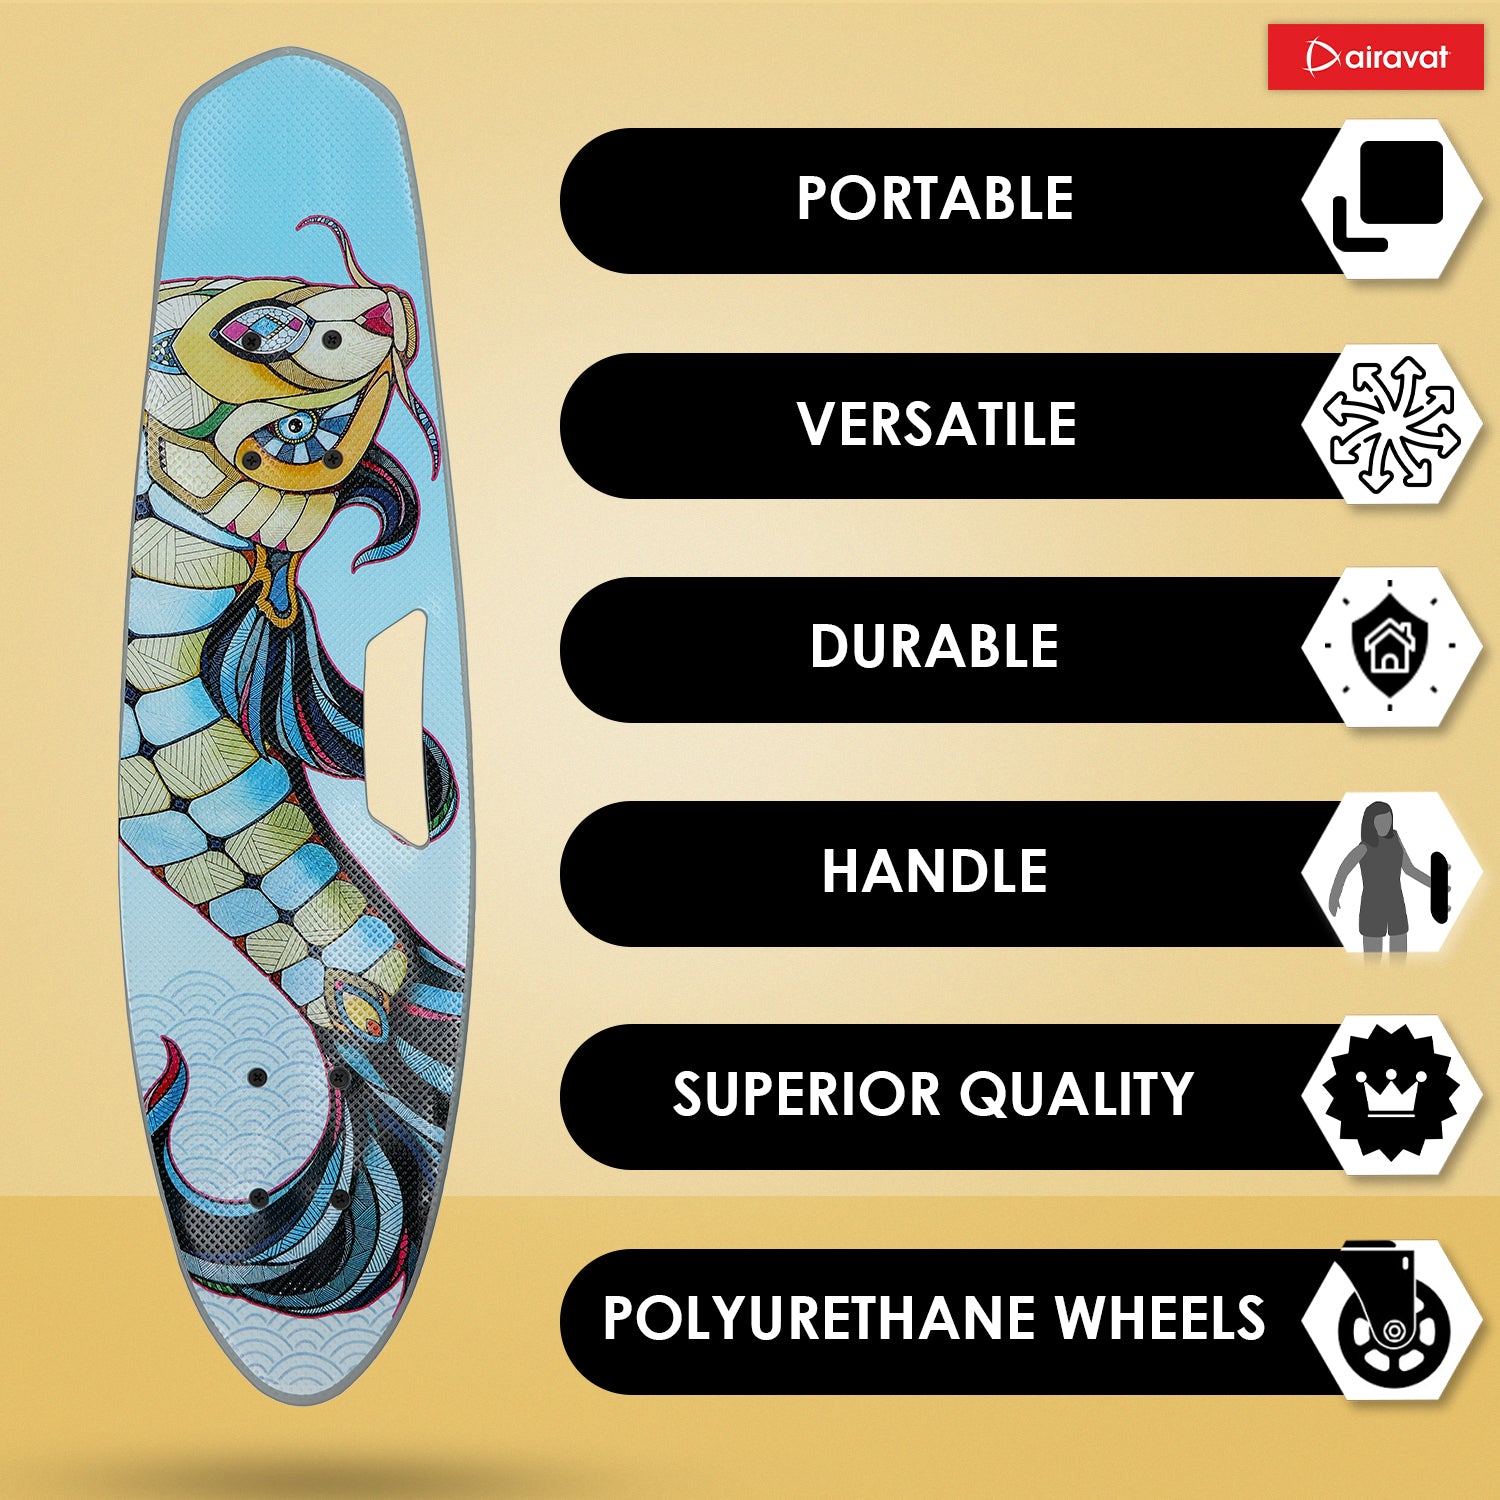 7818-skateboard-style2-more-features